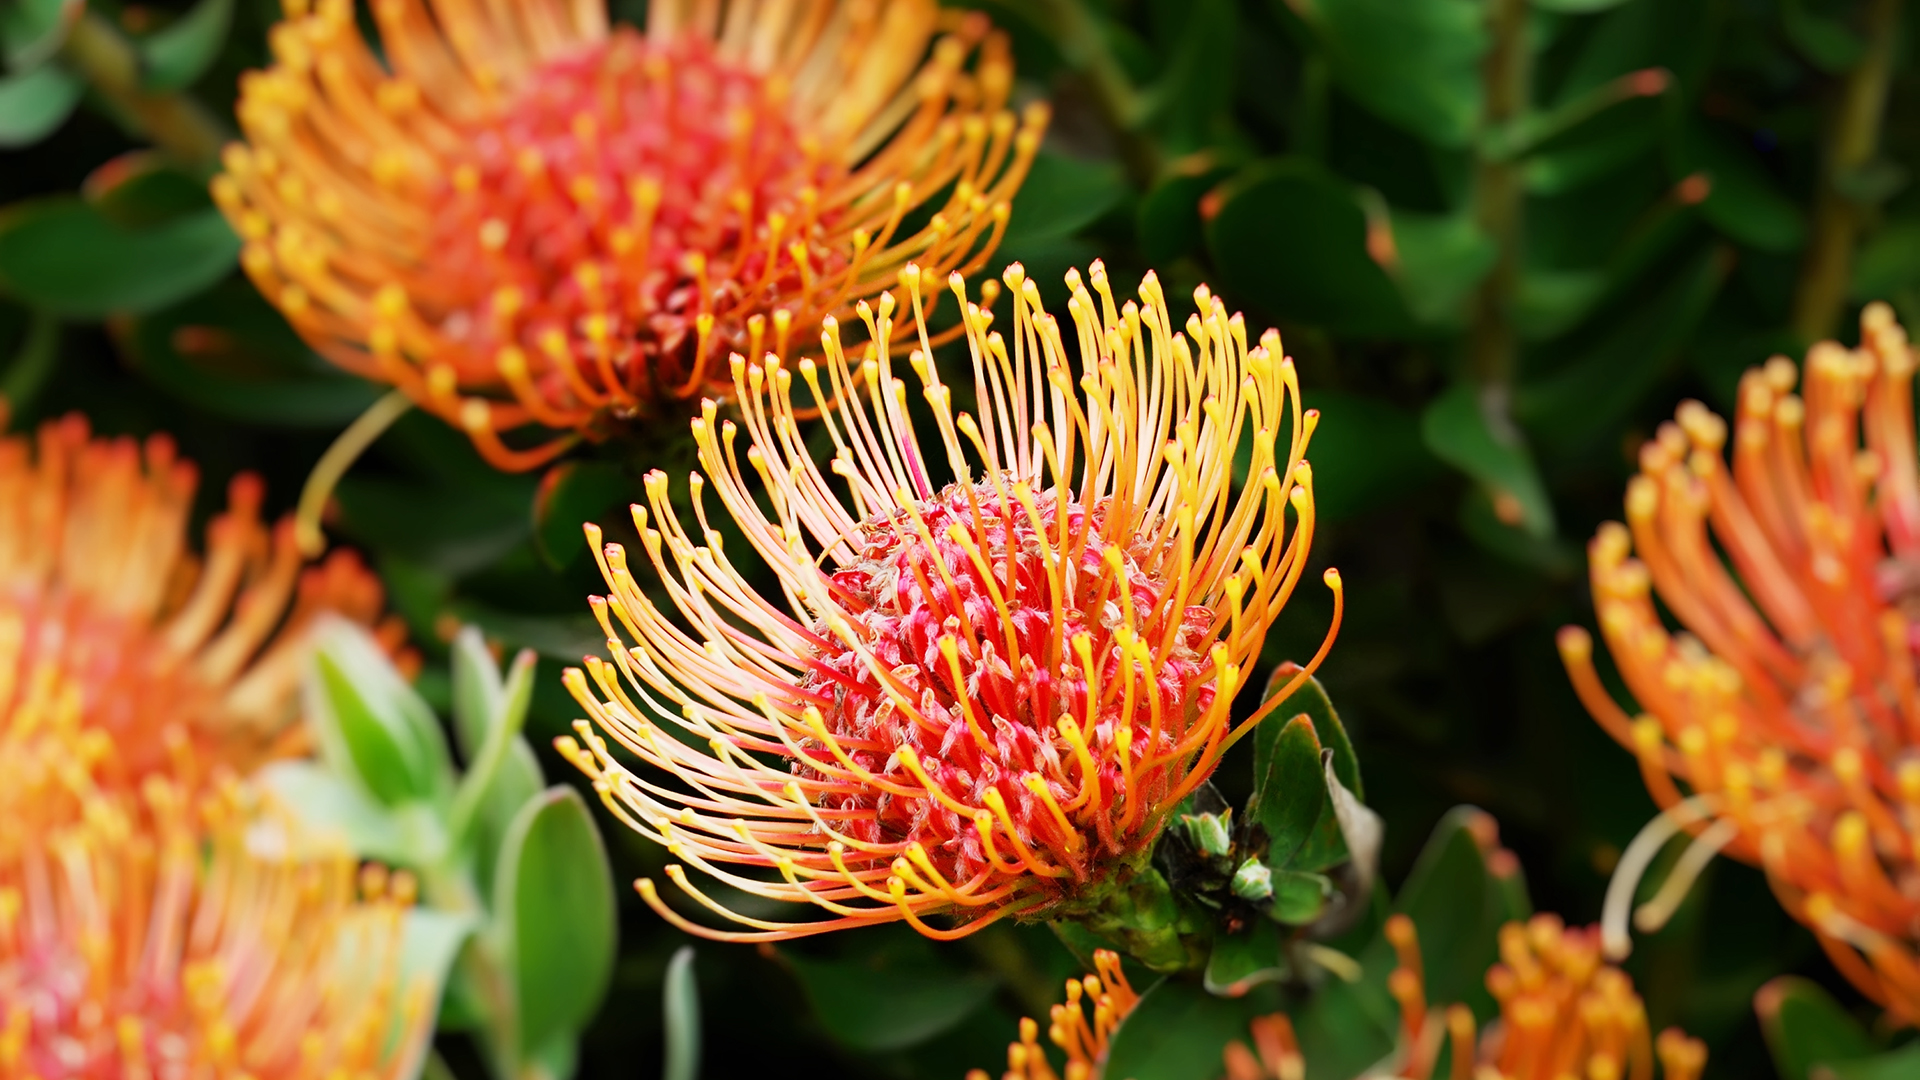 Several African Proteas in bloom.